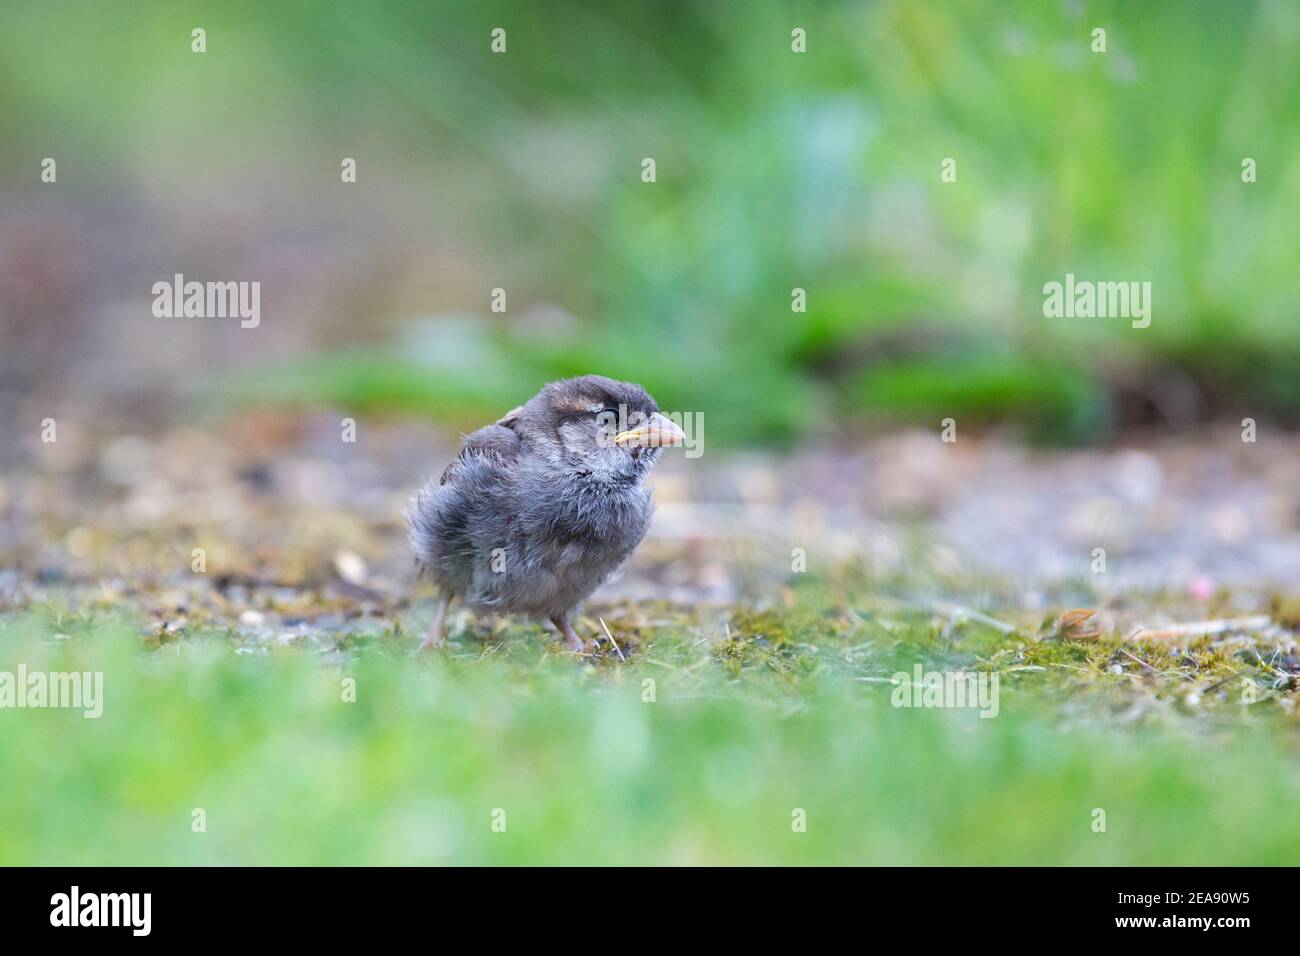 Baby House  Sparrow [ Passer domesticus ] on garden path from very low viewpoint Stock Photo